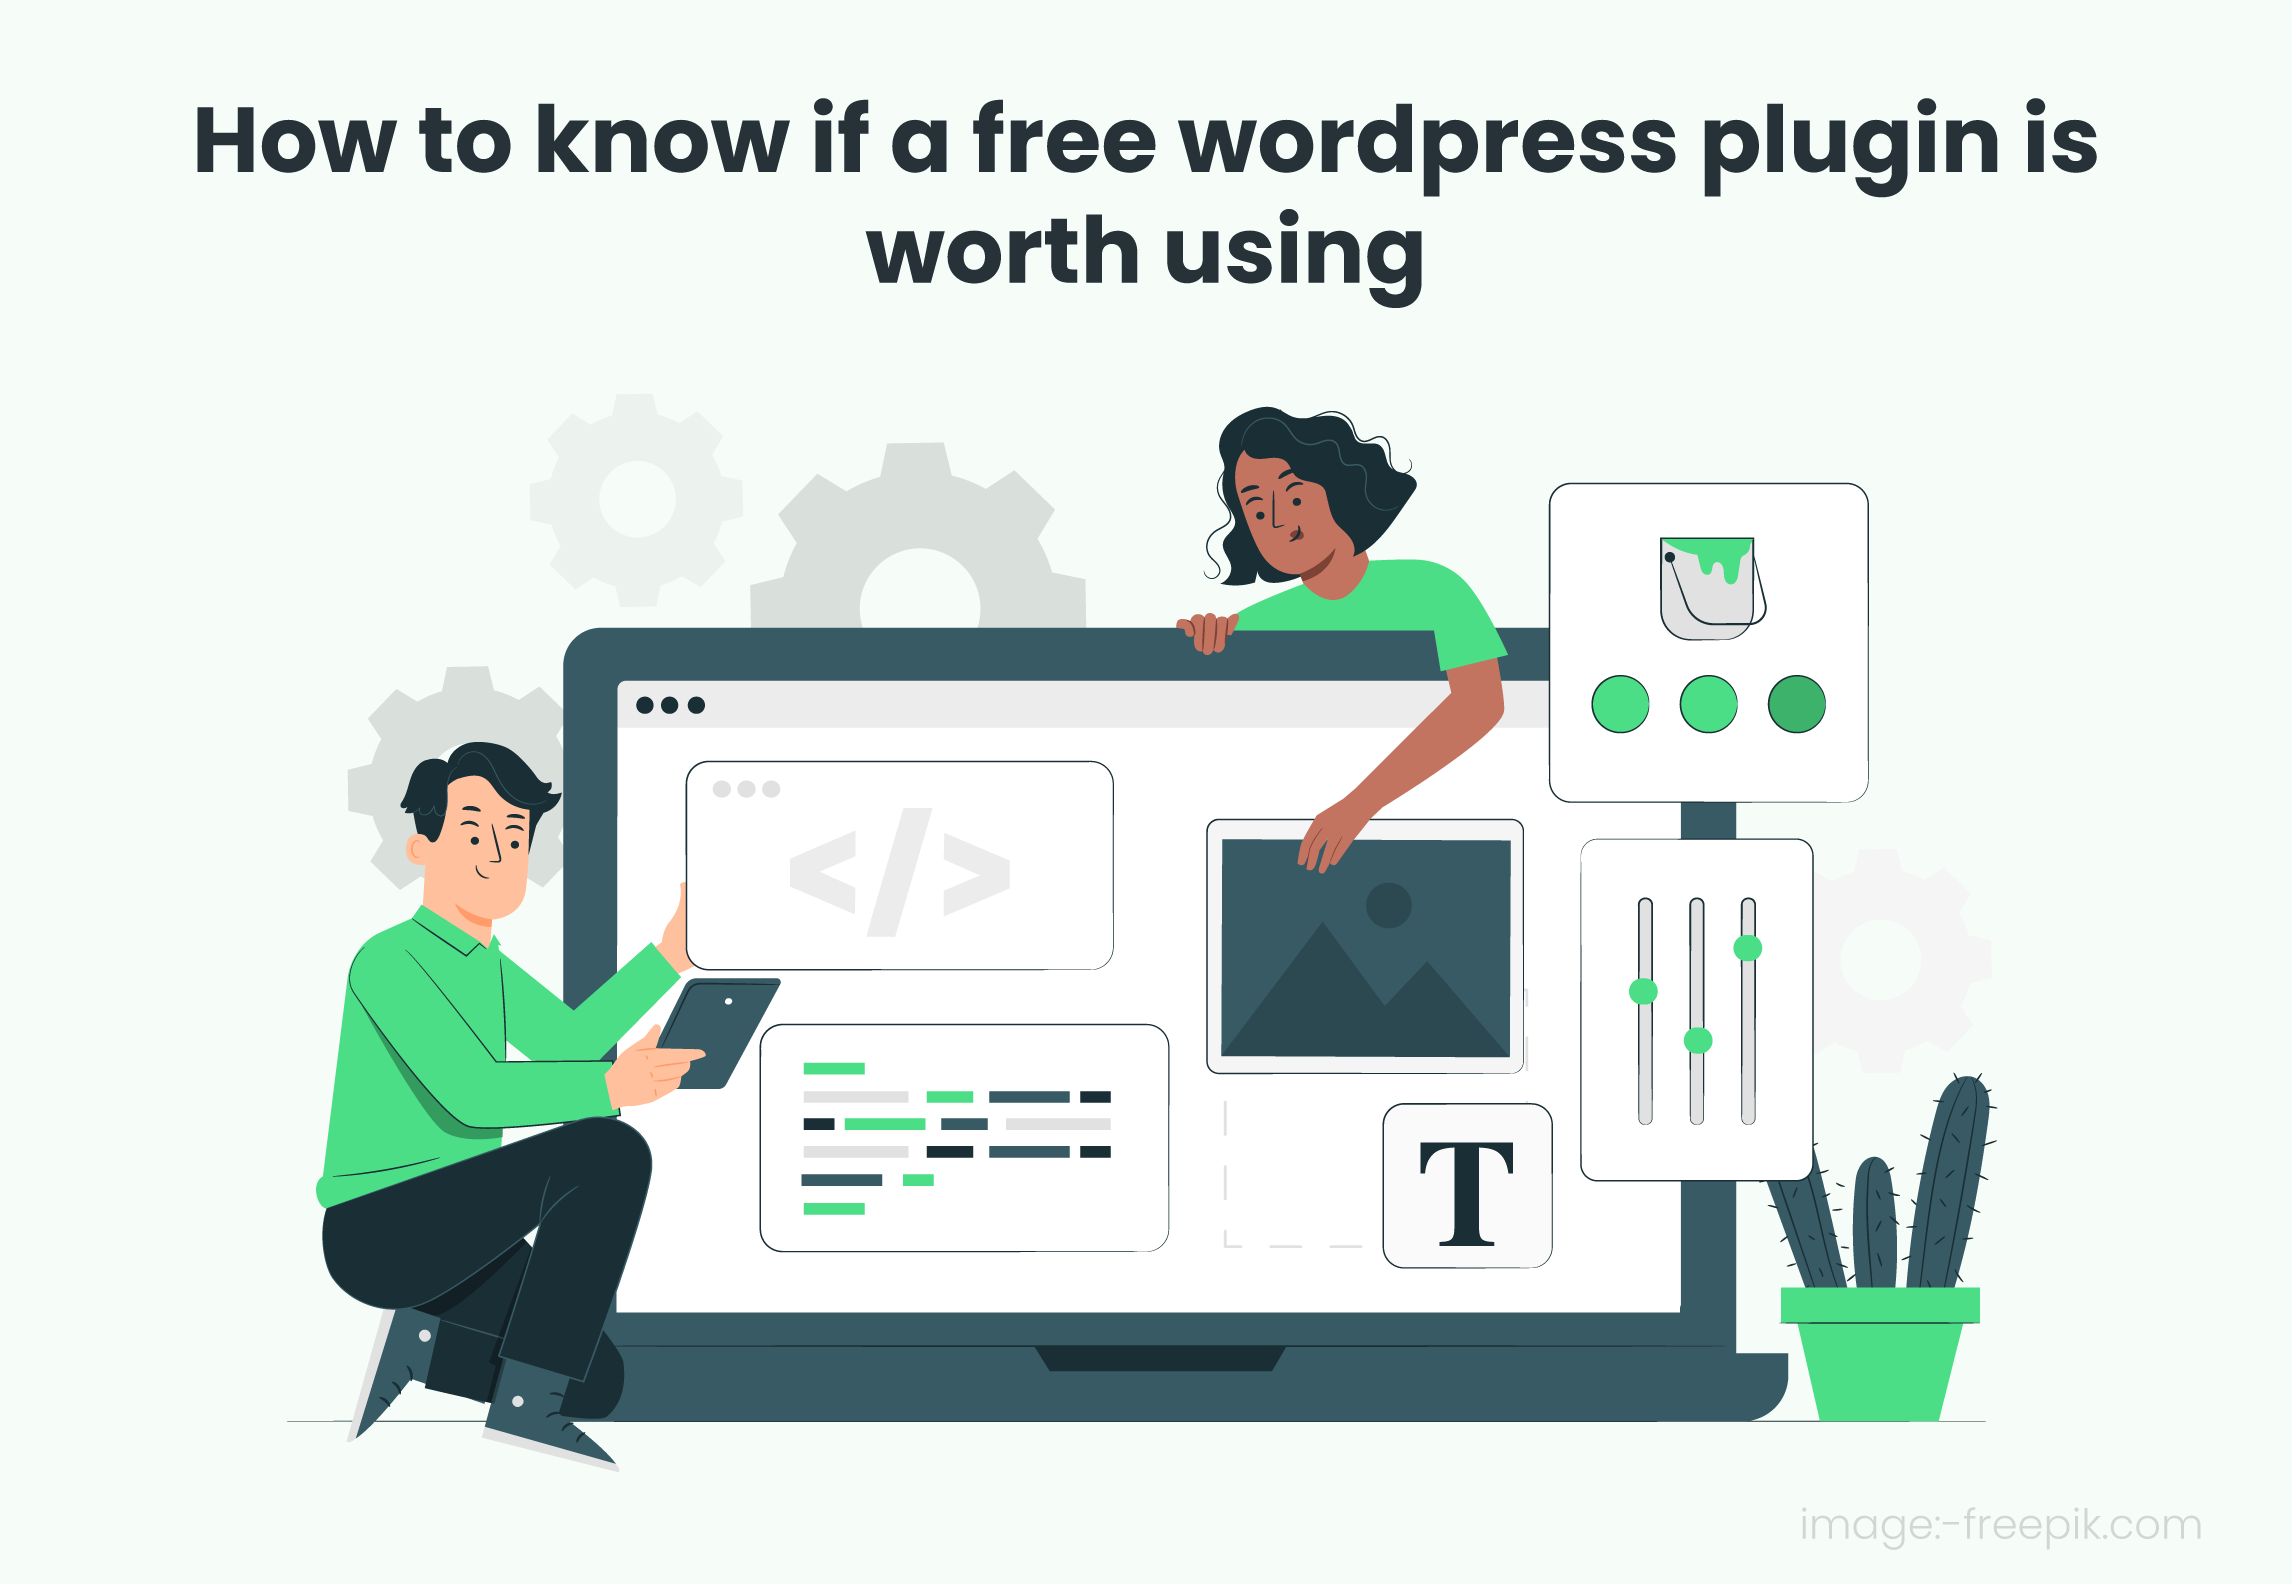 How To Know If A Free WordPress Plugin Is Worth Using